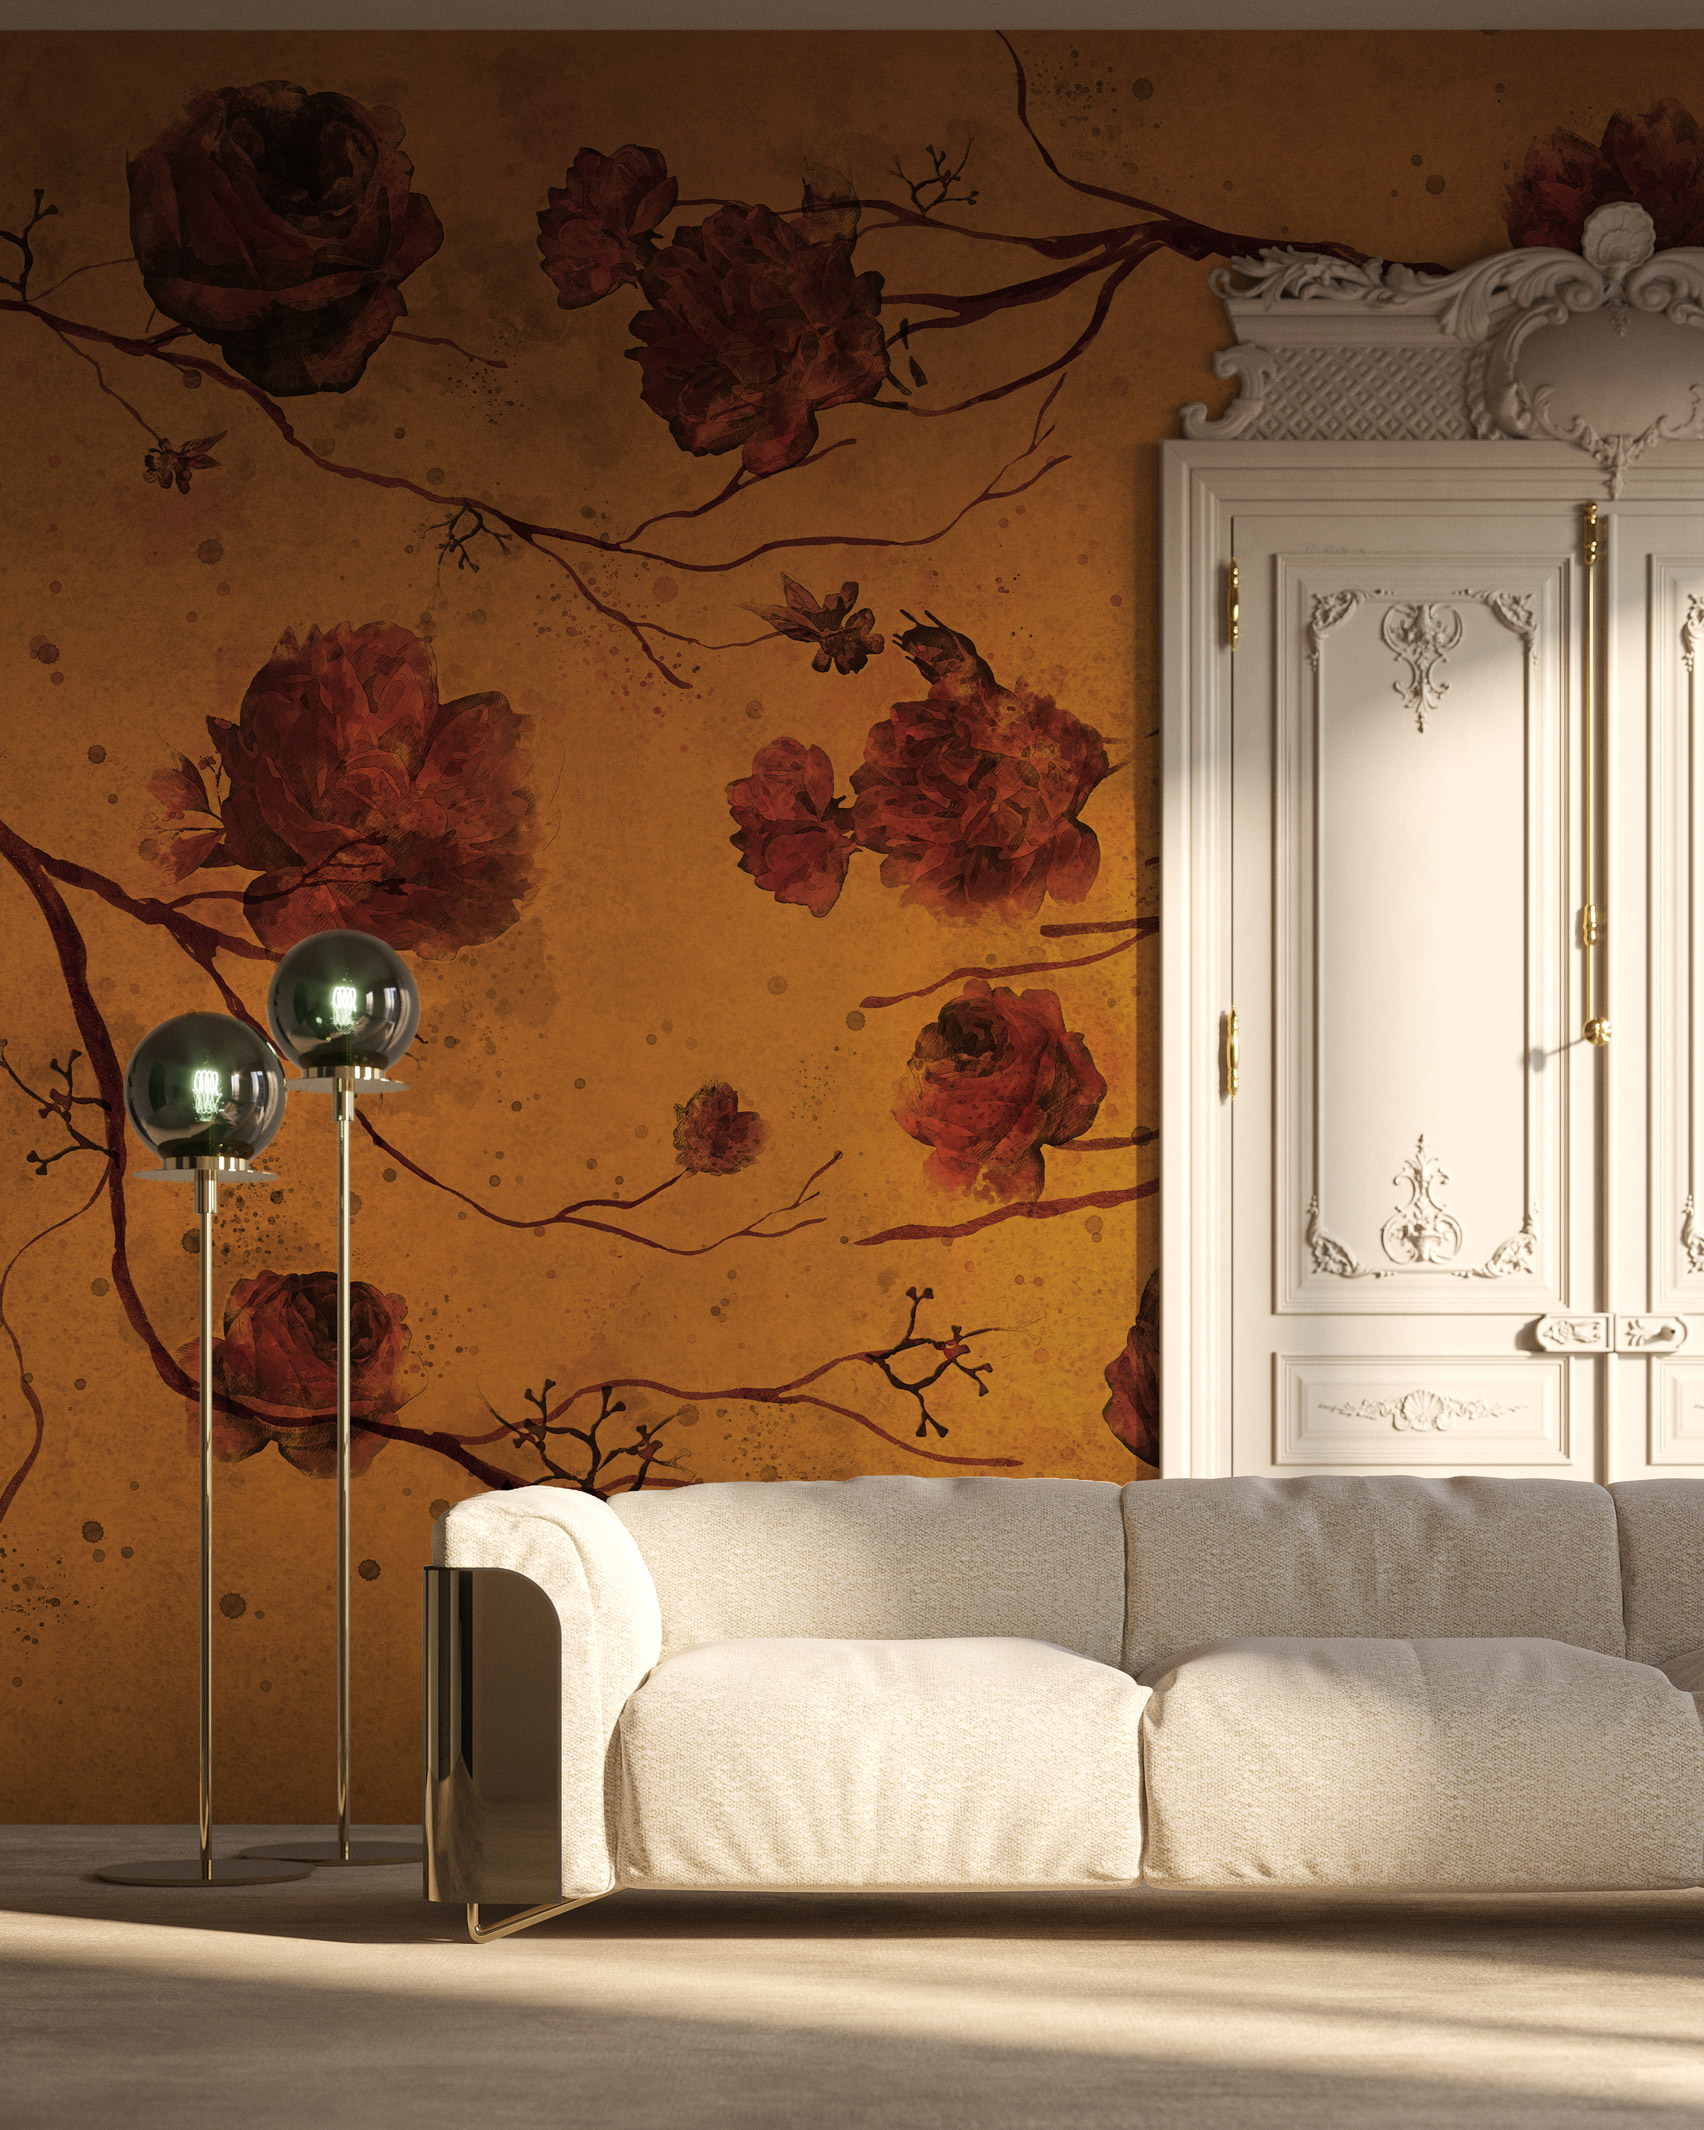 The Daydreamer is a wallpaper collection by Gio Pagani